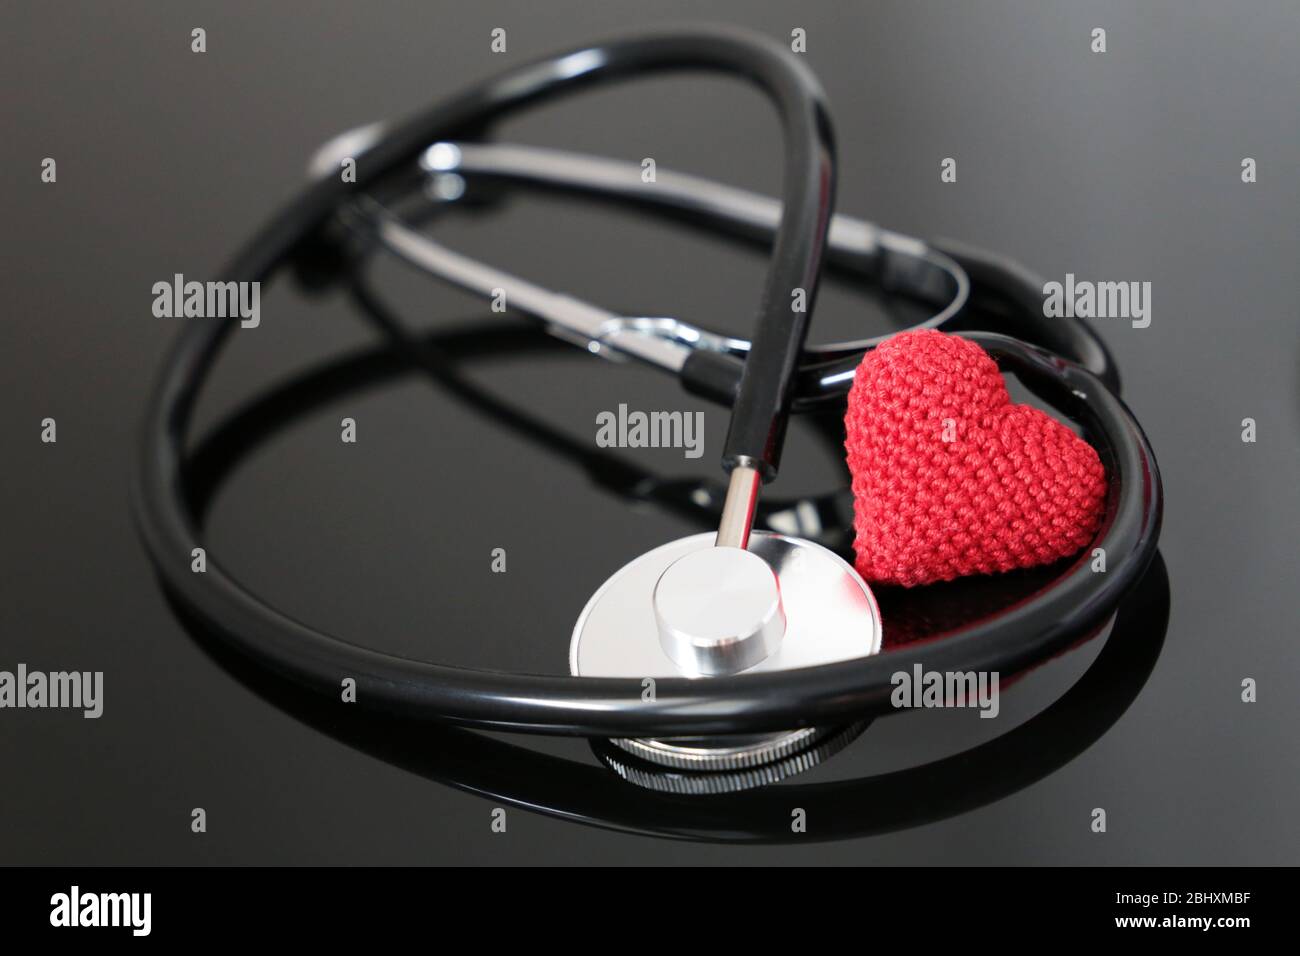 Health care and cardiology, stethoscope and red knitted heart on dark glass table. Concept of diagnosis, treatment of heart diseases Stock Photo